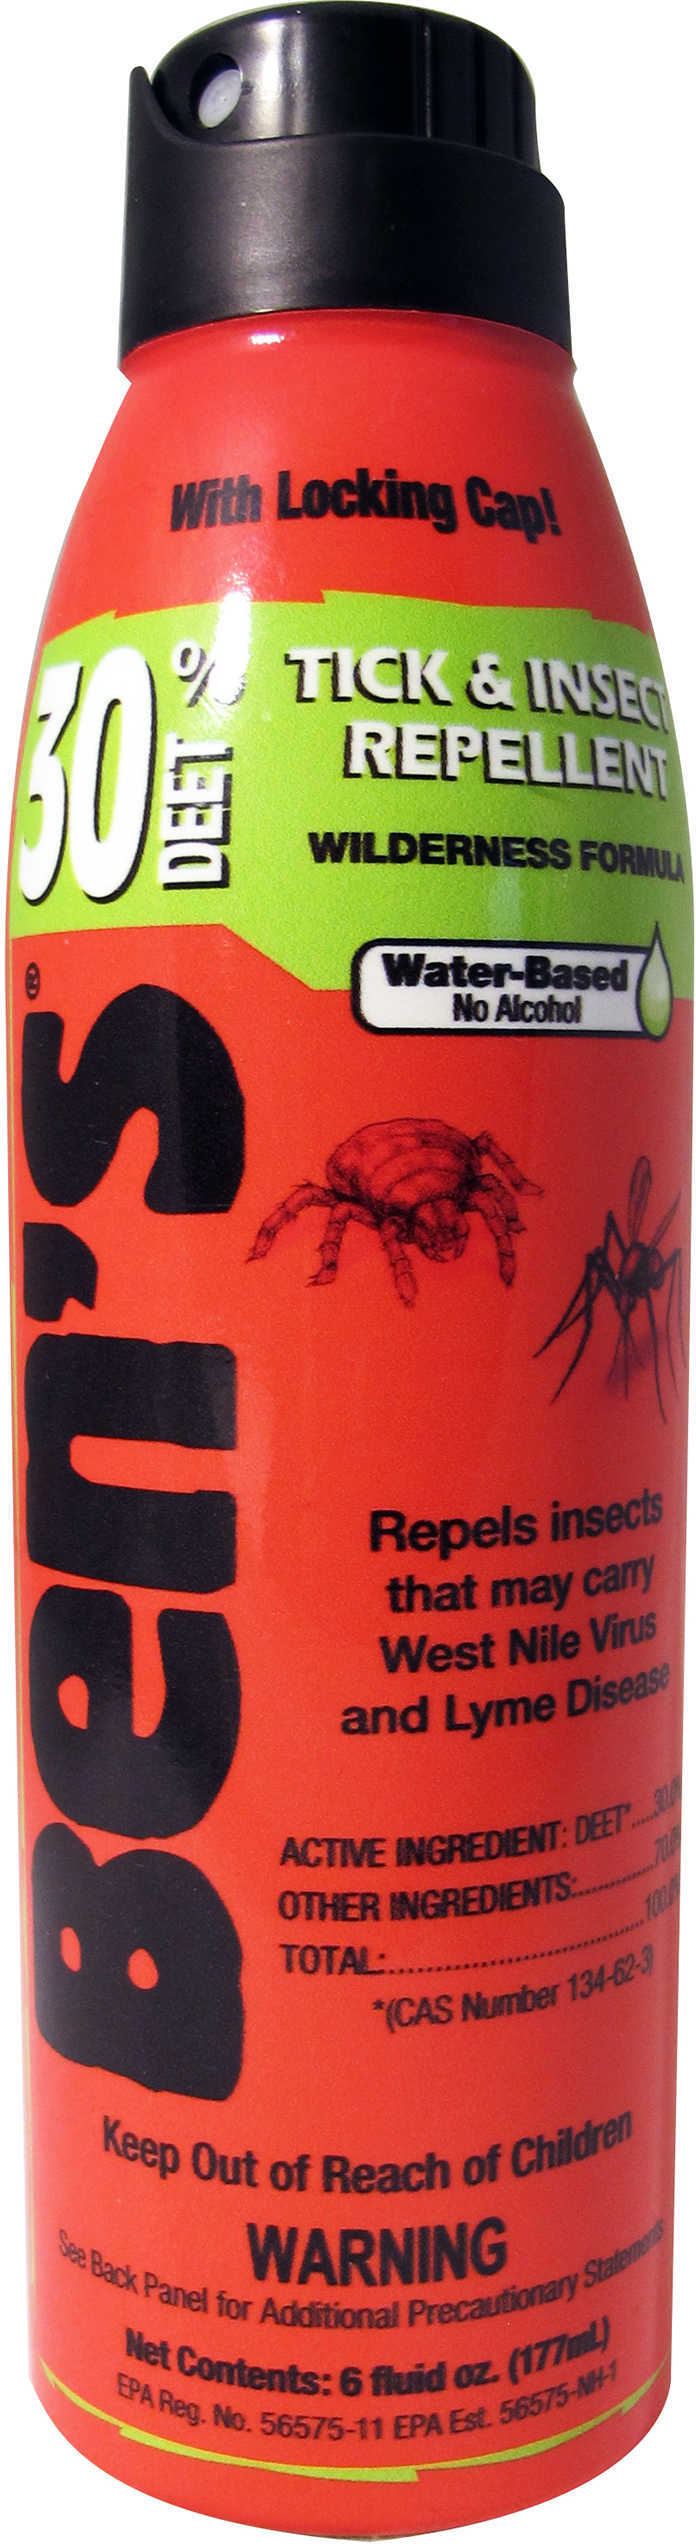 Bens / Tender Corp Insect Repellent 30 Eco-Spray 6Oz Model: 0006-7178